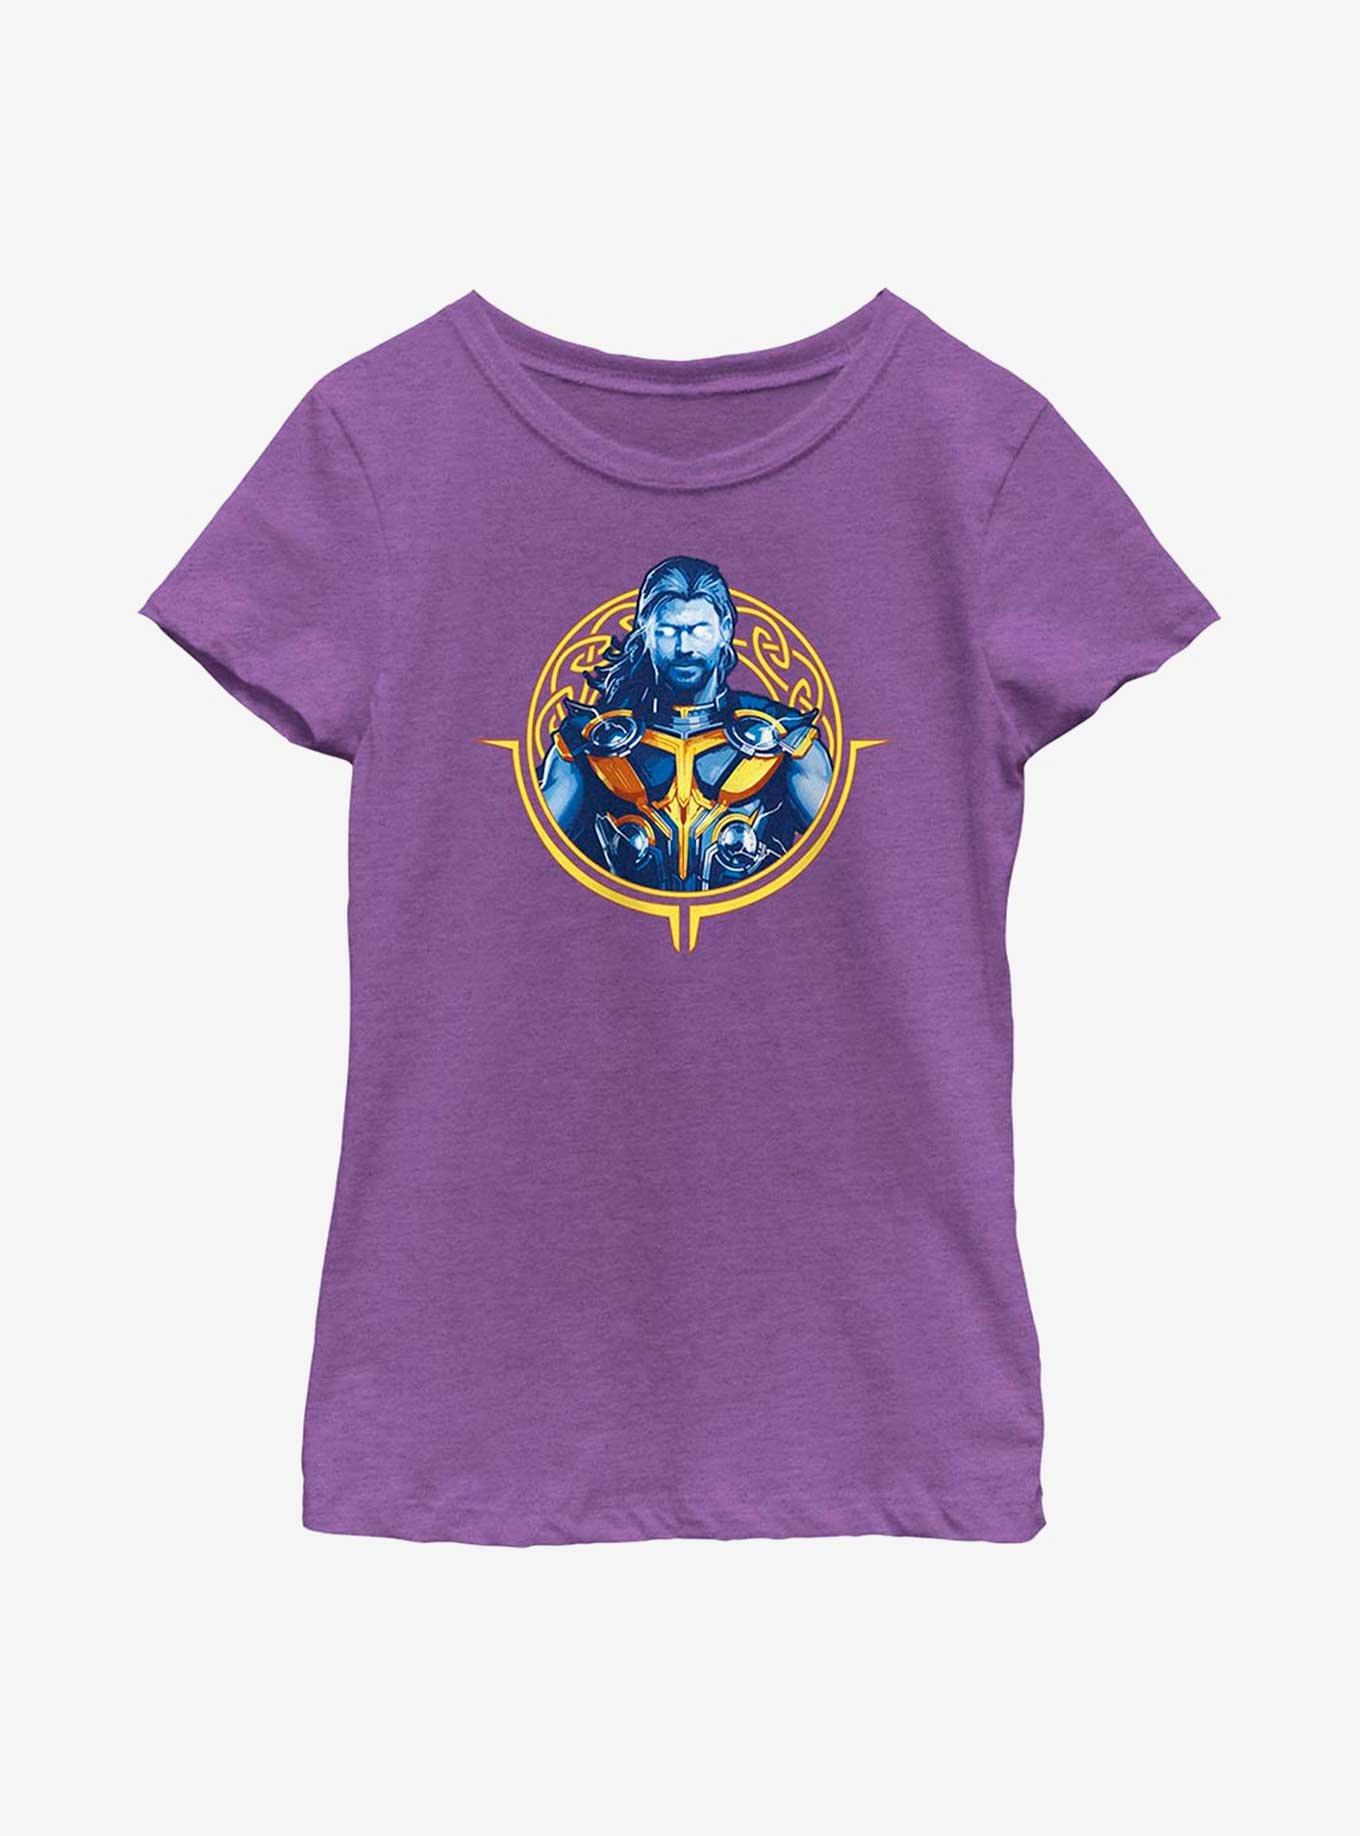 Marvel Thor: Love And Thunder Circle Badge Youth Girls T-Shirt, PURPLE BERRY, hi-res